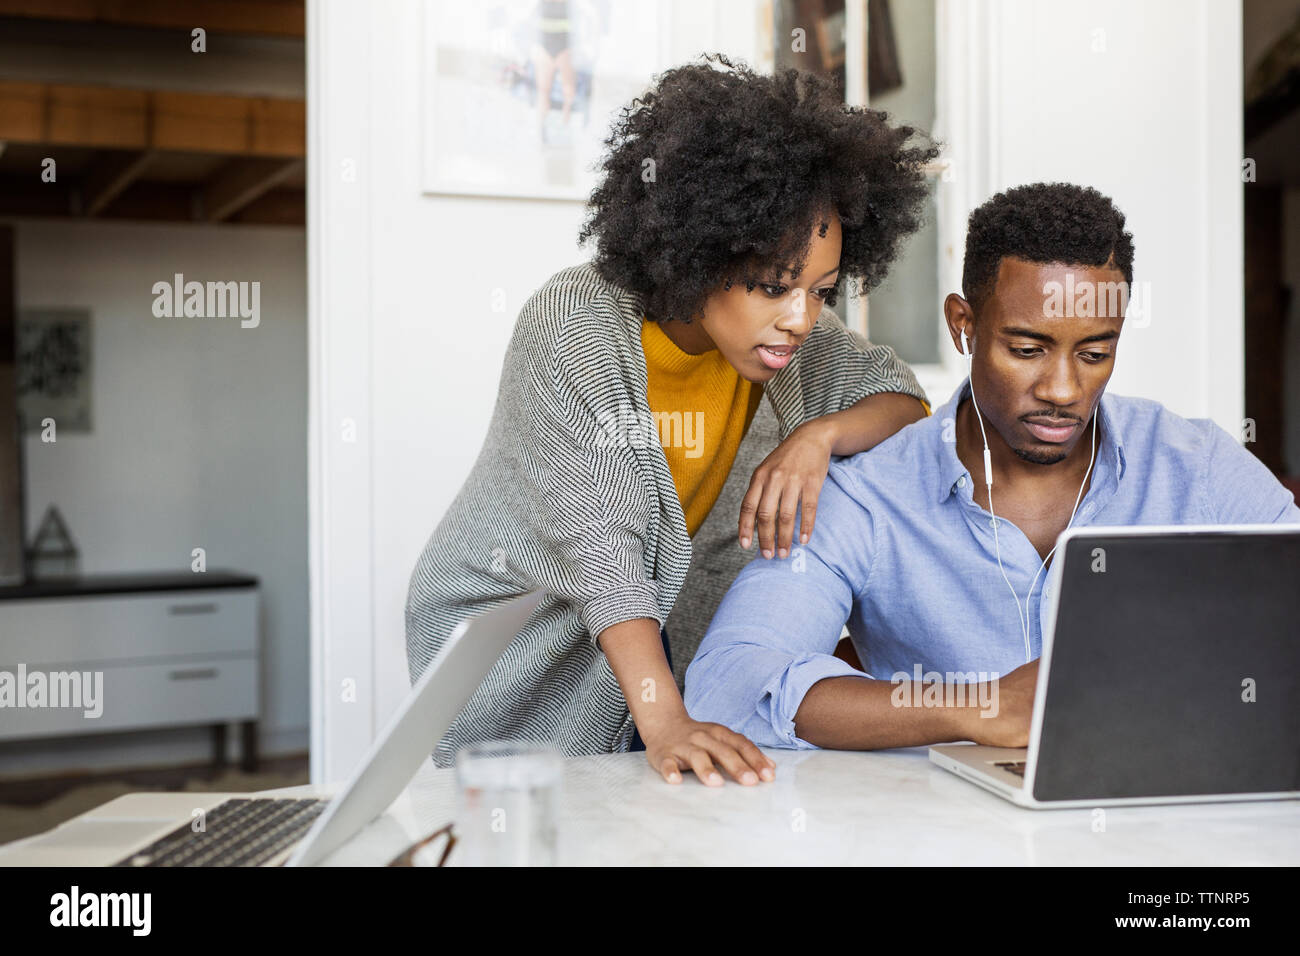 Woman looking while boyfriend using laptop computer at table Stock Photo